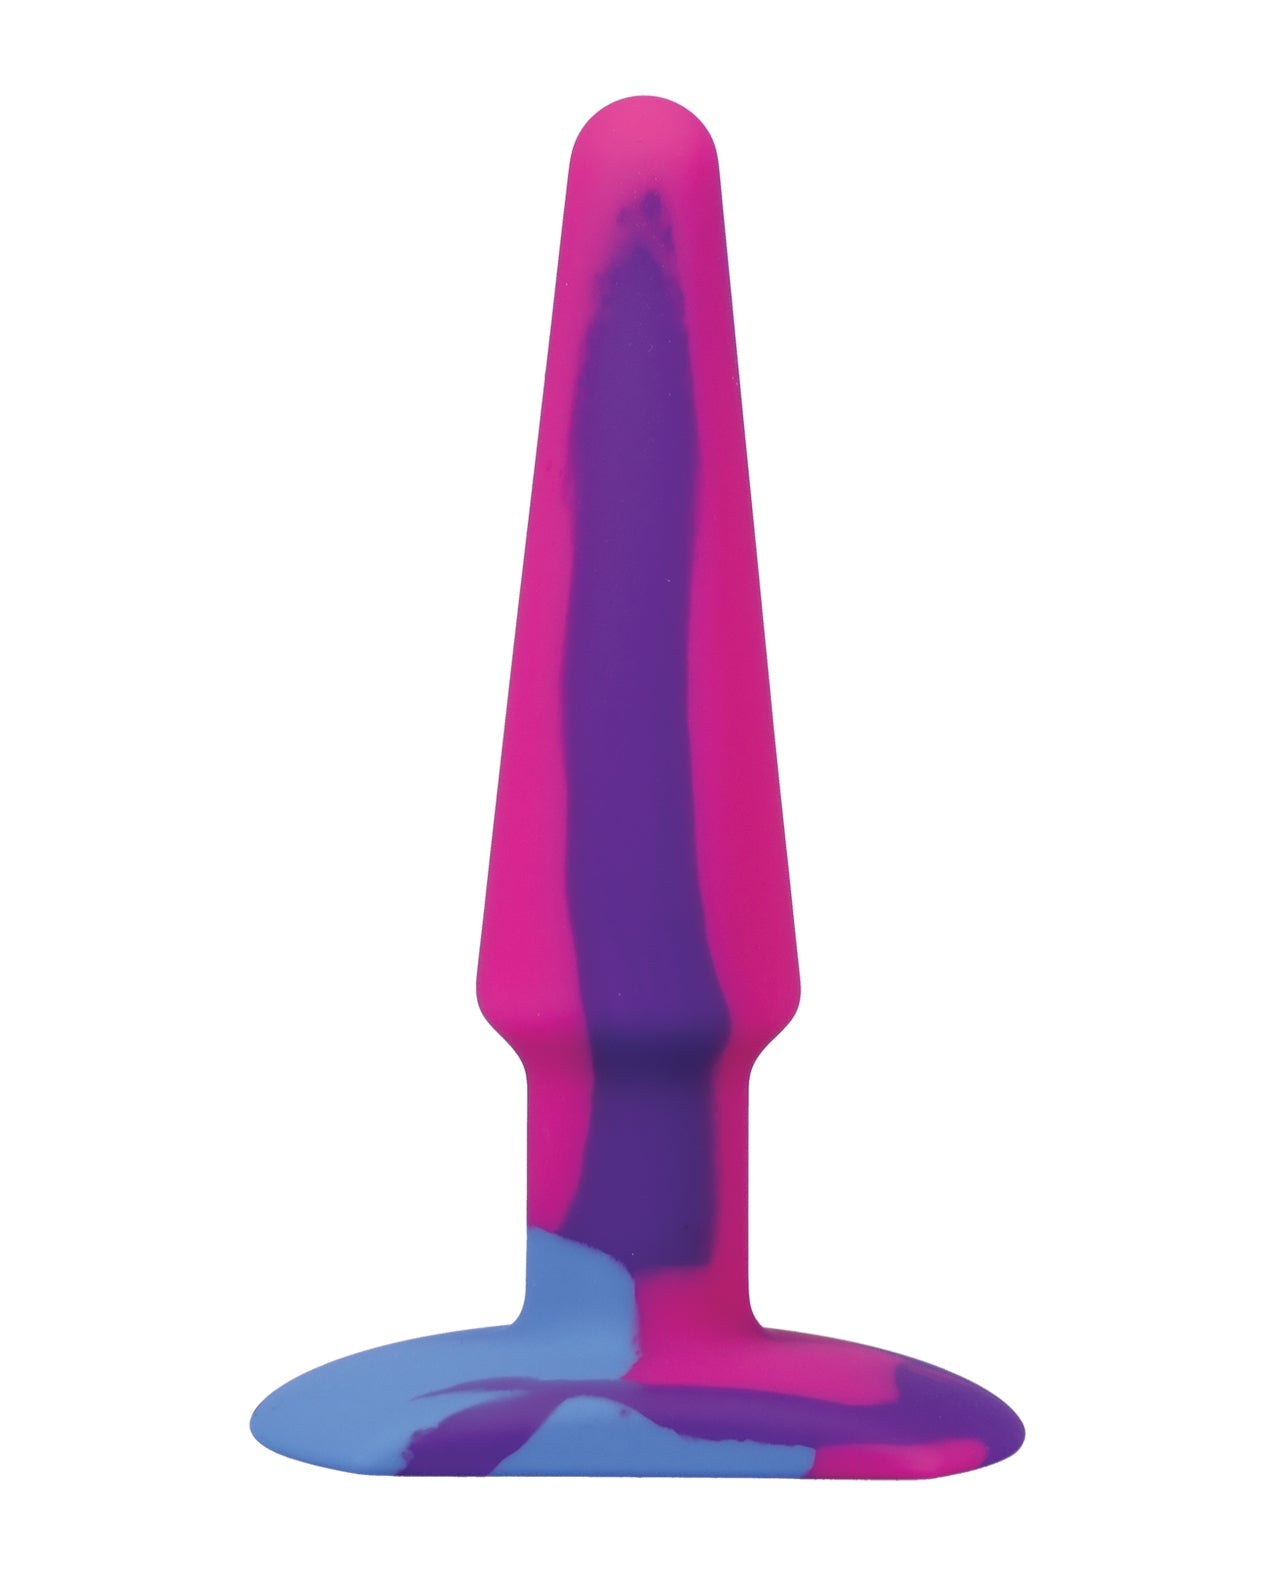 A Play 5" Groovy Silicone Anal Plug - Multicolor/Pink